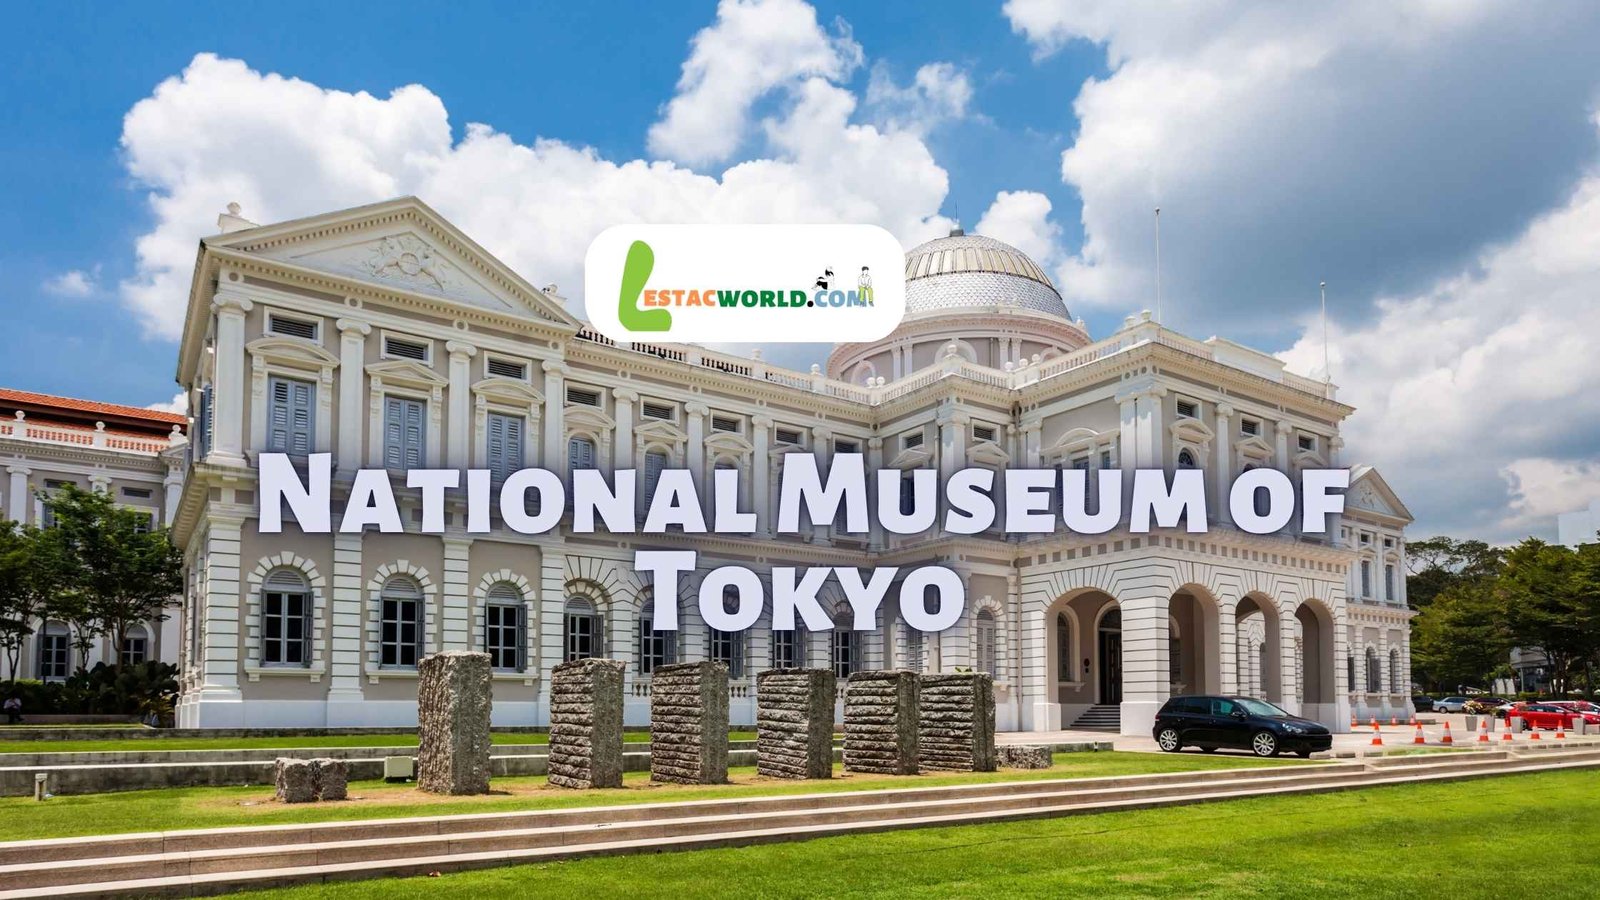 About National Museum of Tokyo